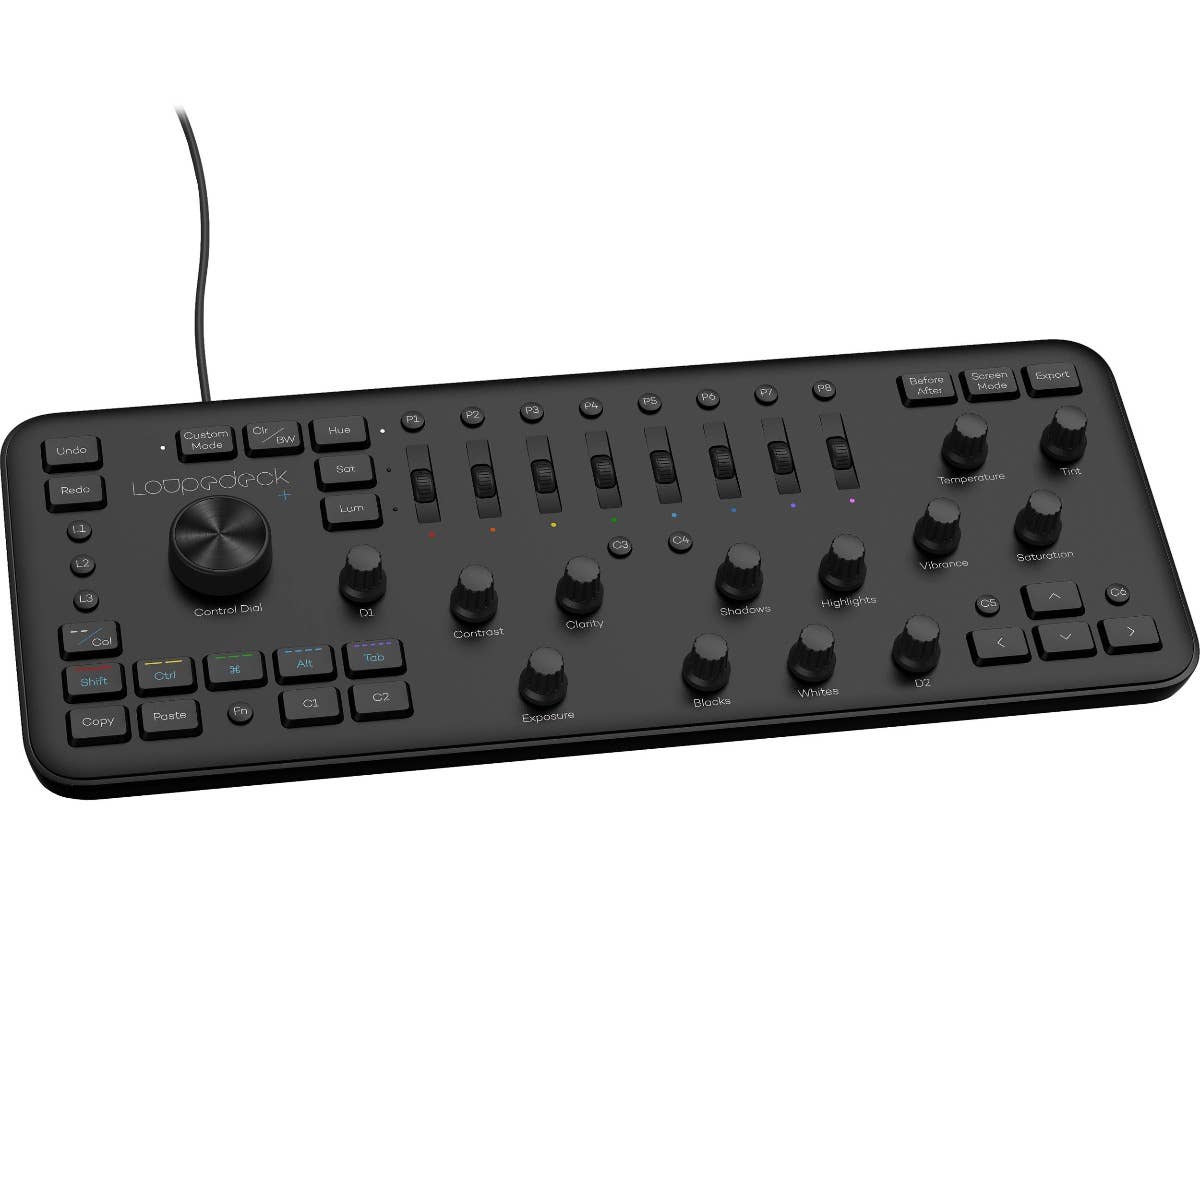 Loupedeck+ The Photo and Video Editing Console - Store 974 | ستور ٩٧٤